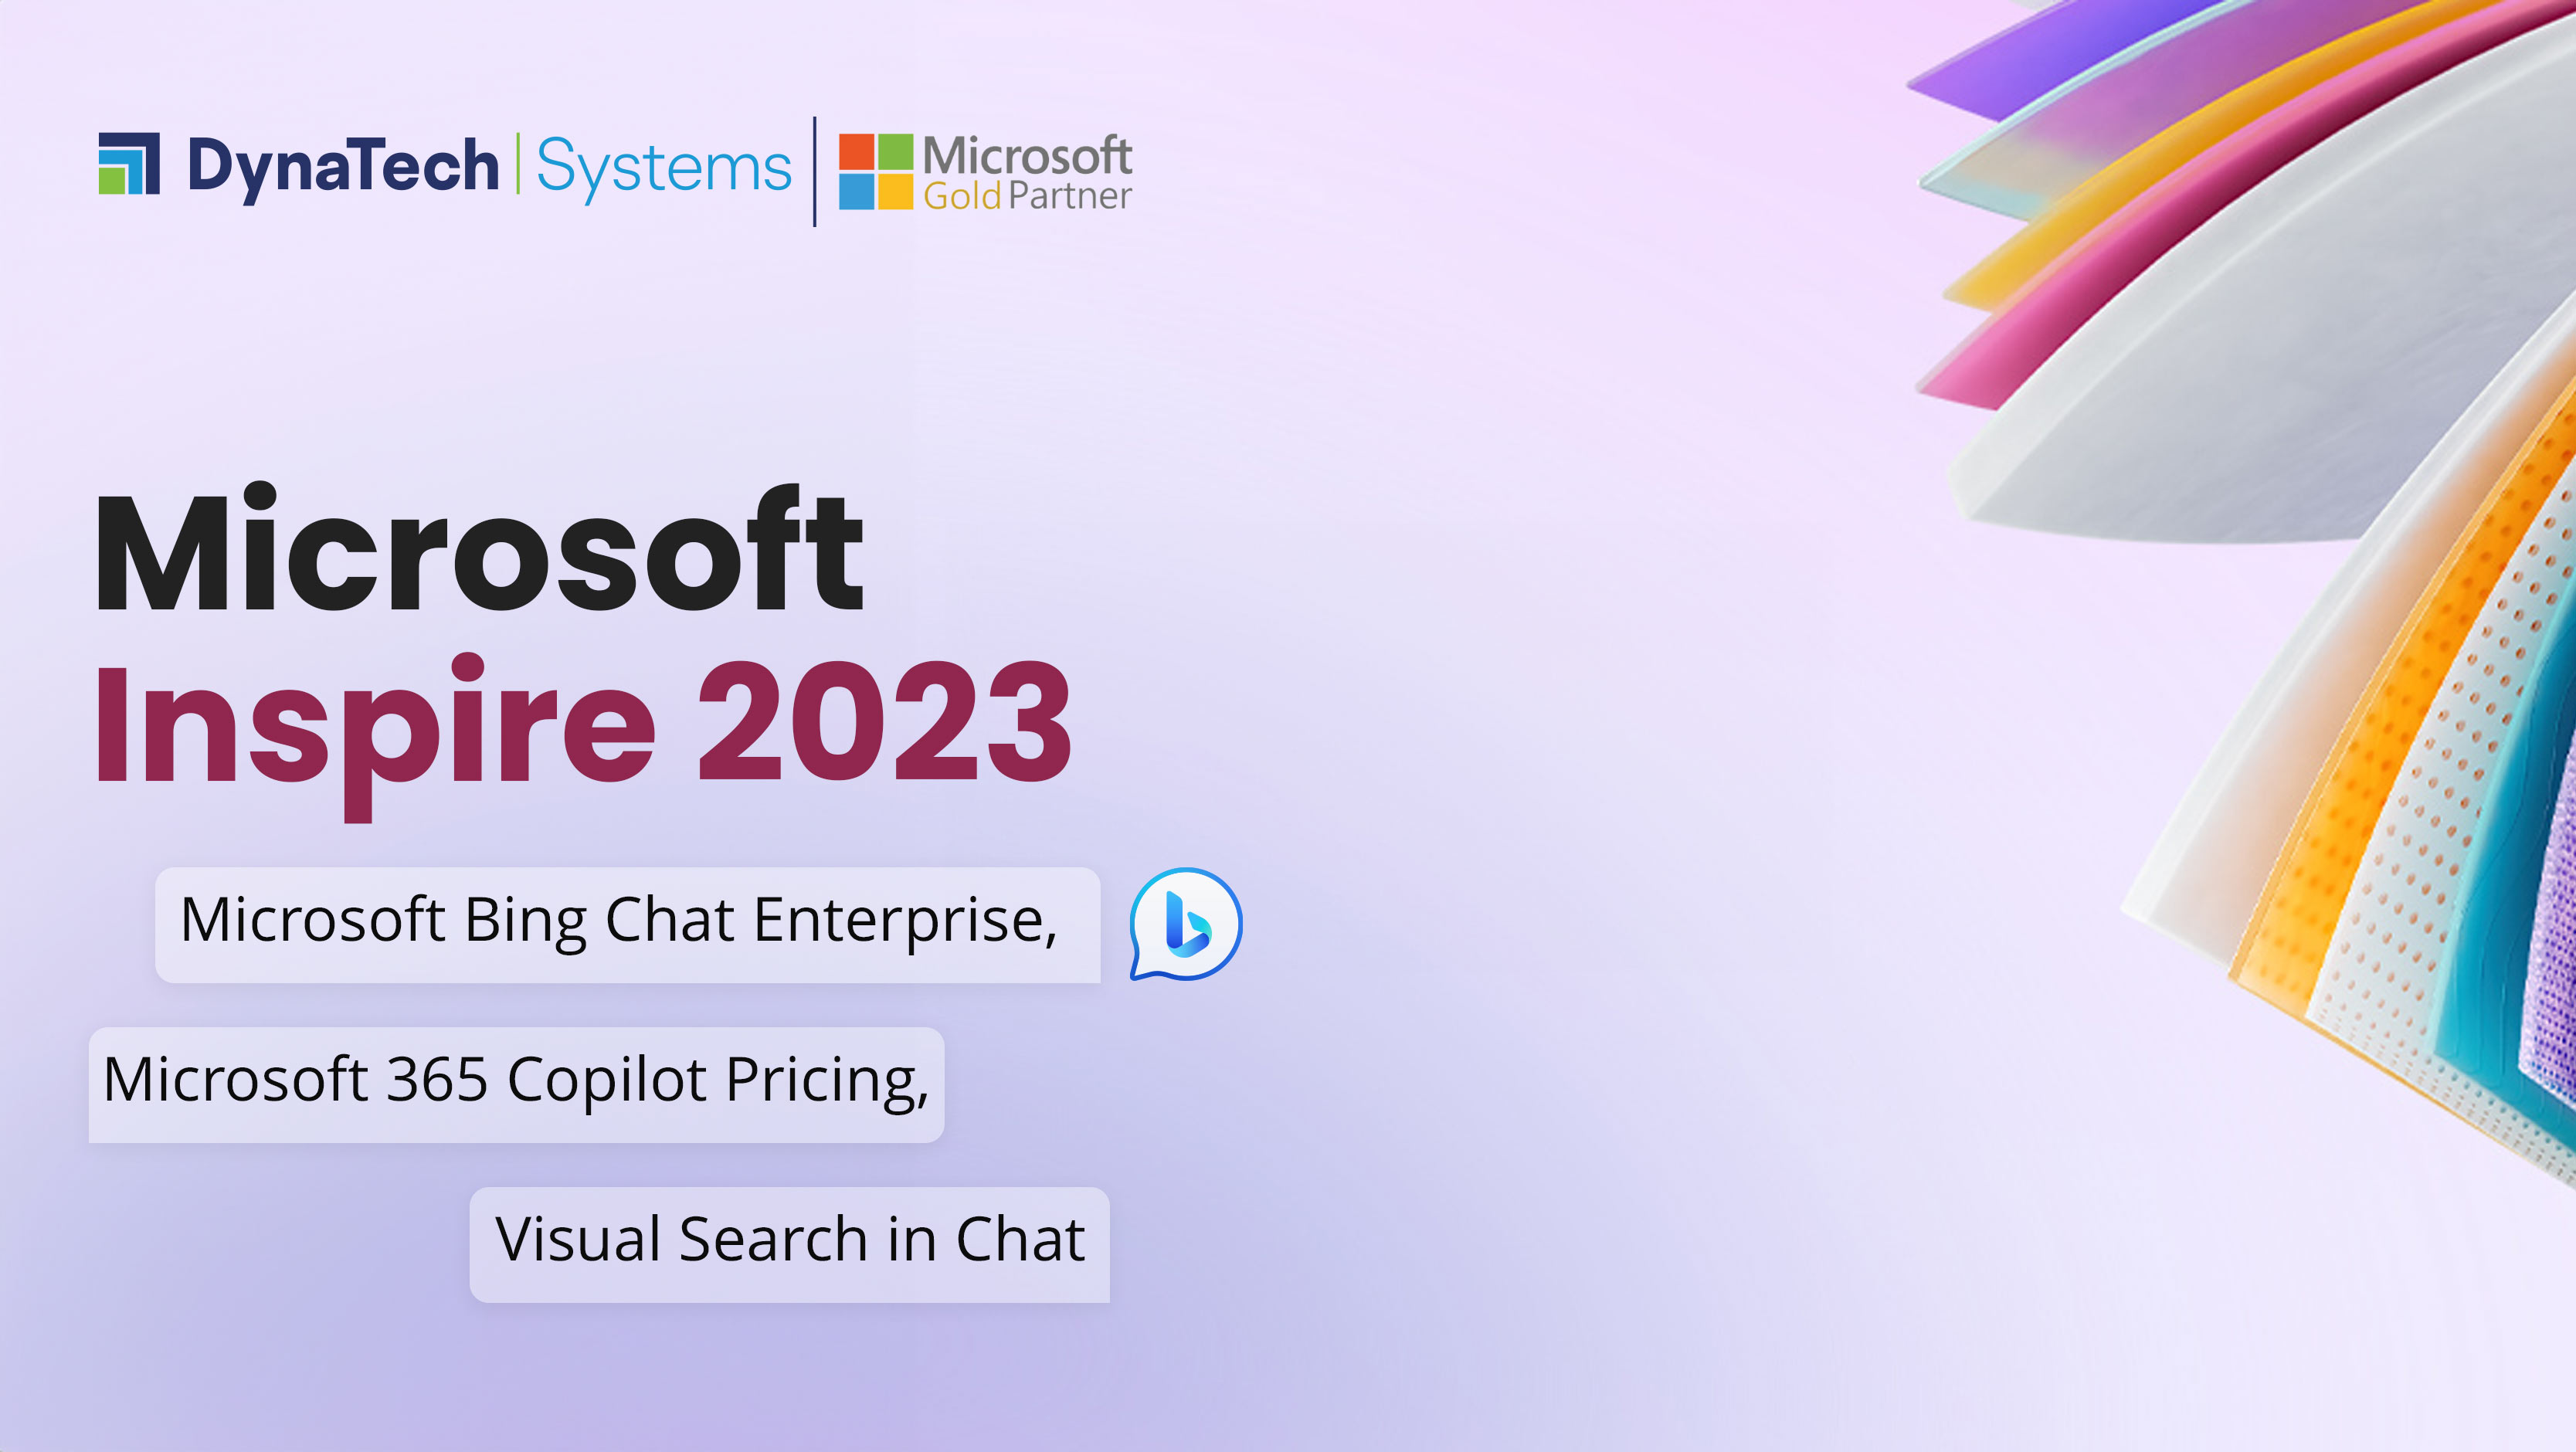 Microsoft Inspire: Microsoft Bing Chat Enterprise, Microsoft 365 Copilot Pricing, and Visual Search in Chat